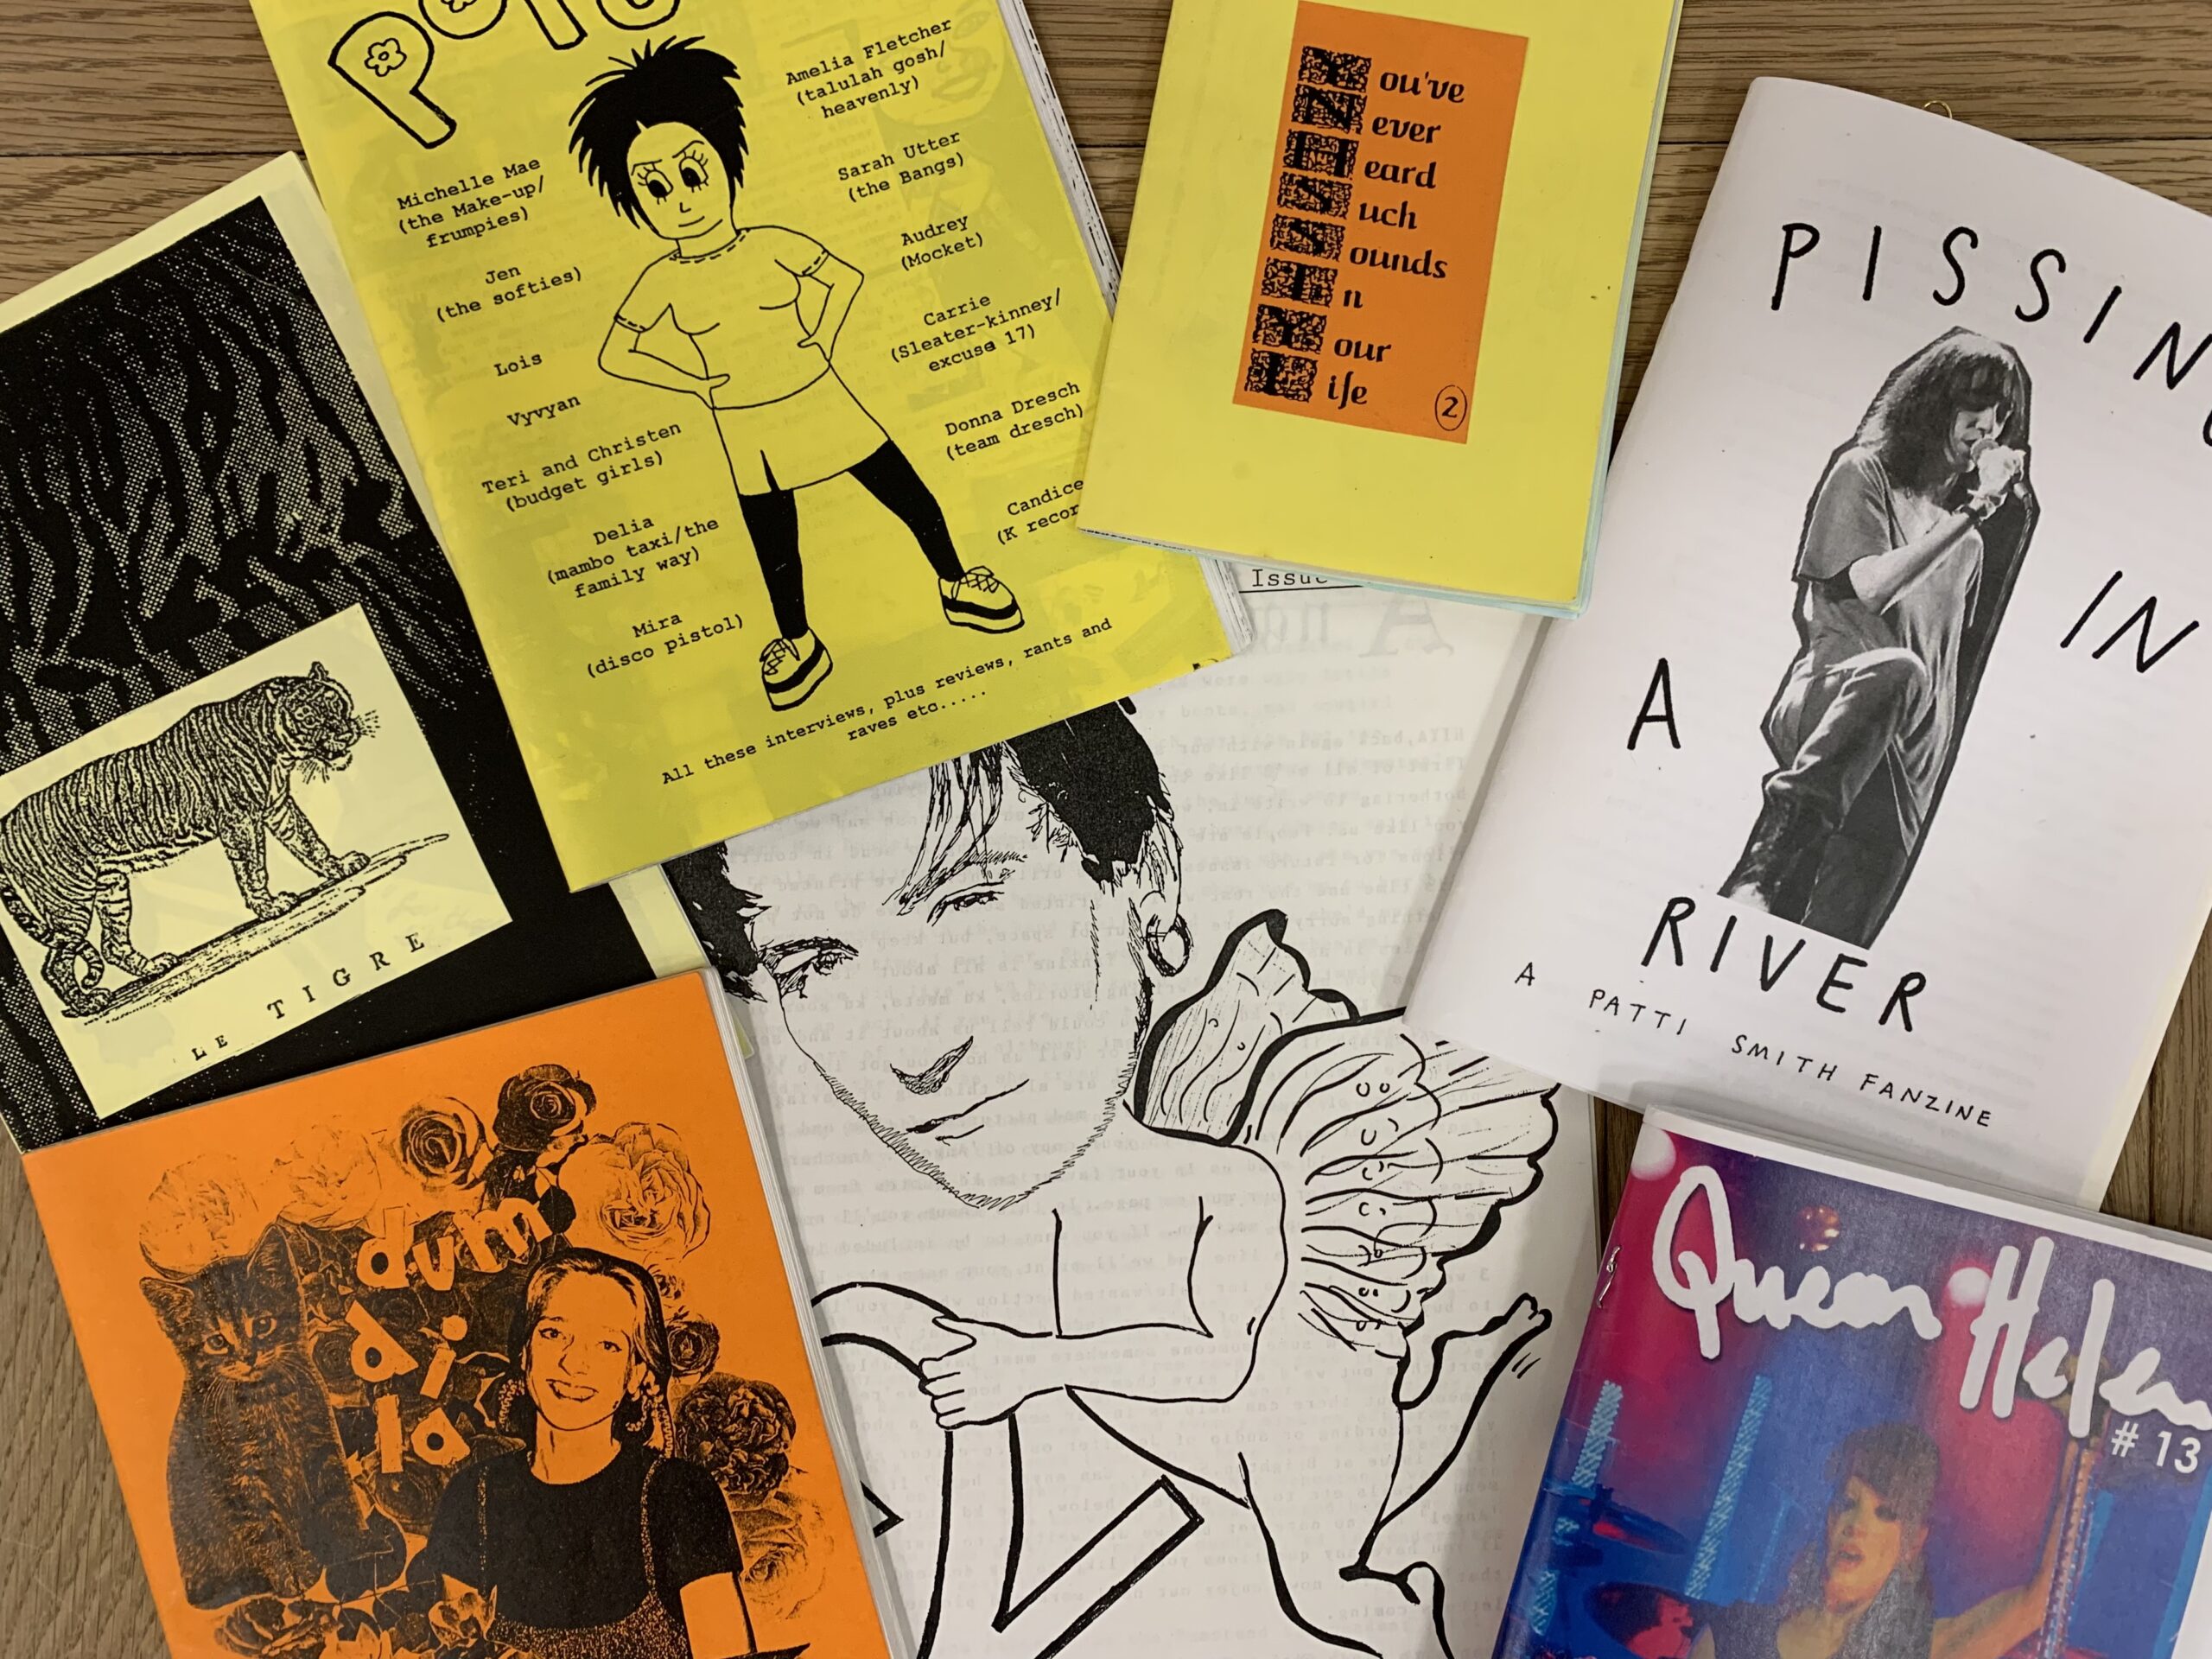 A collection of music zines (handmade and self-published magazines) in colours yellow, pink, blue, orange, black and white, lying on a wooden table.